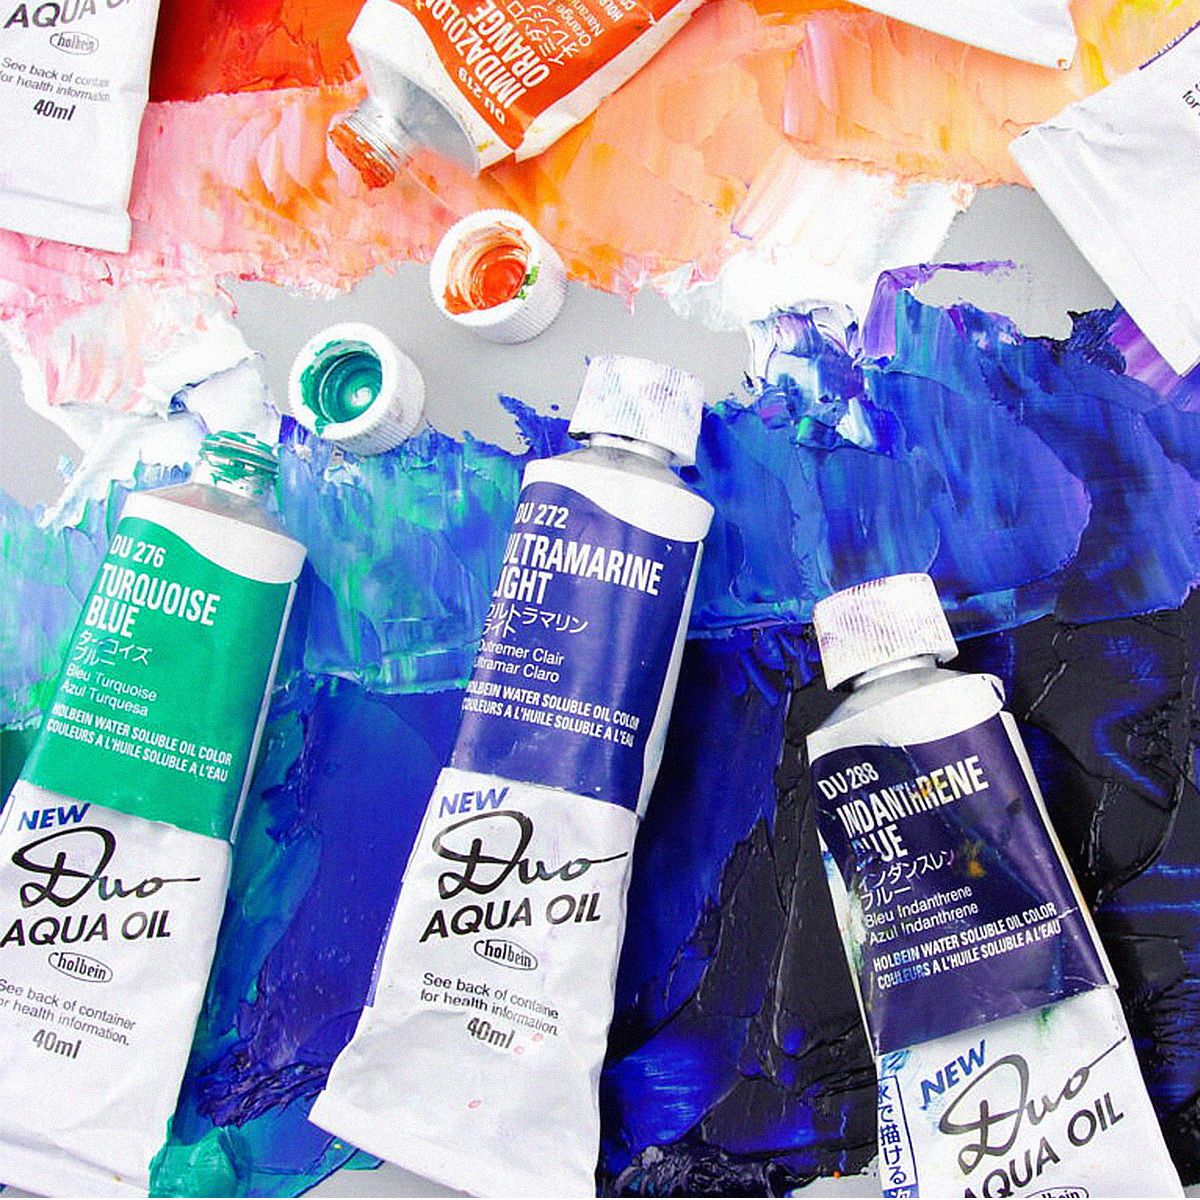 Holbein Duo Aqua Water-Soluble Oils & Sets